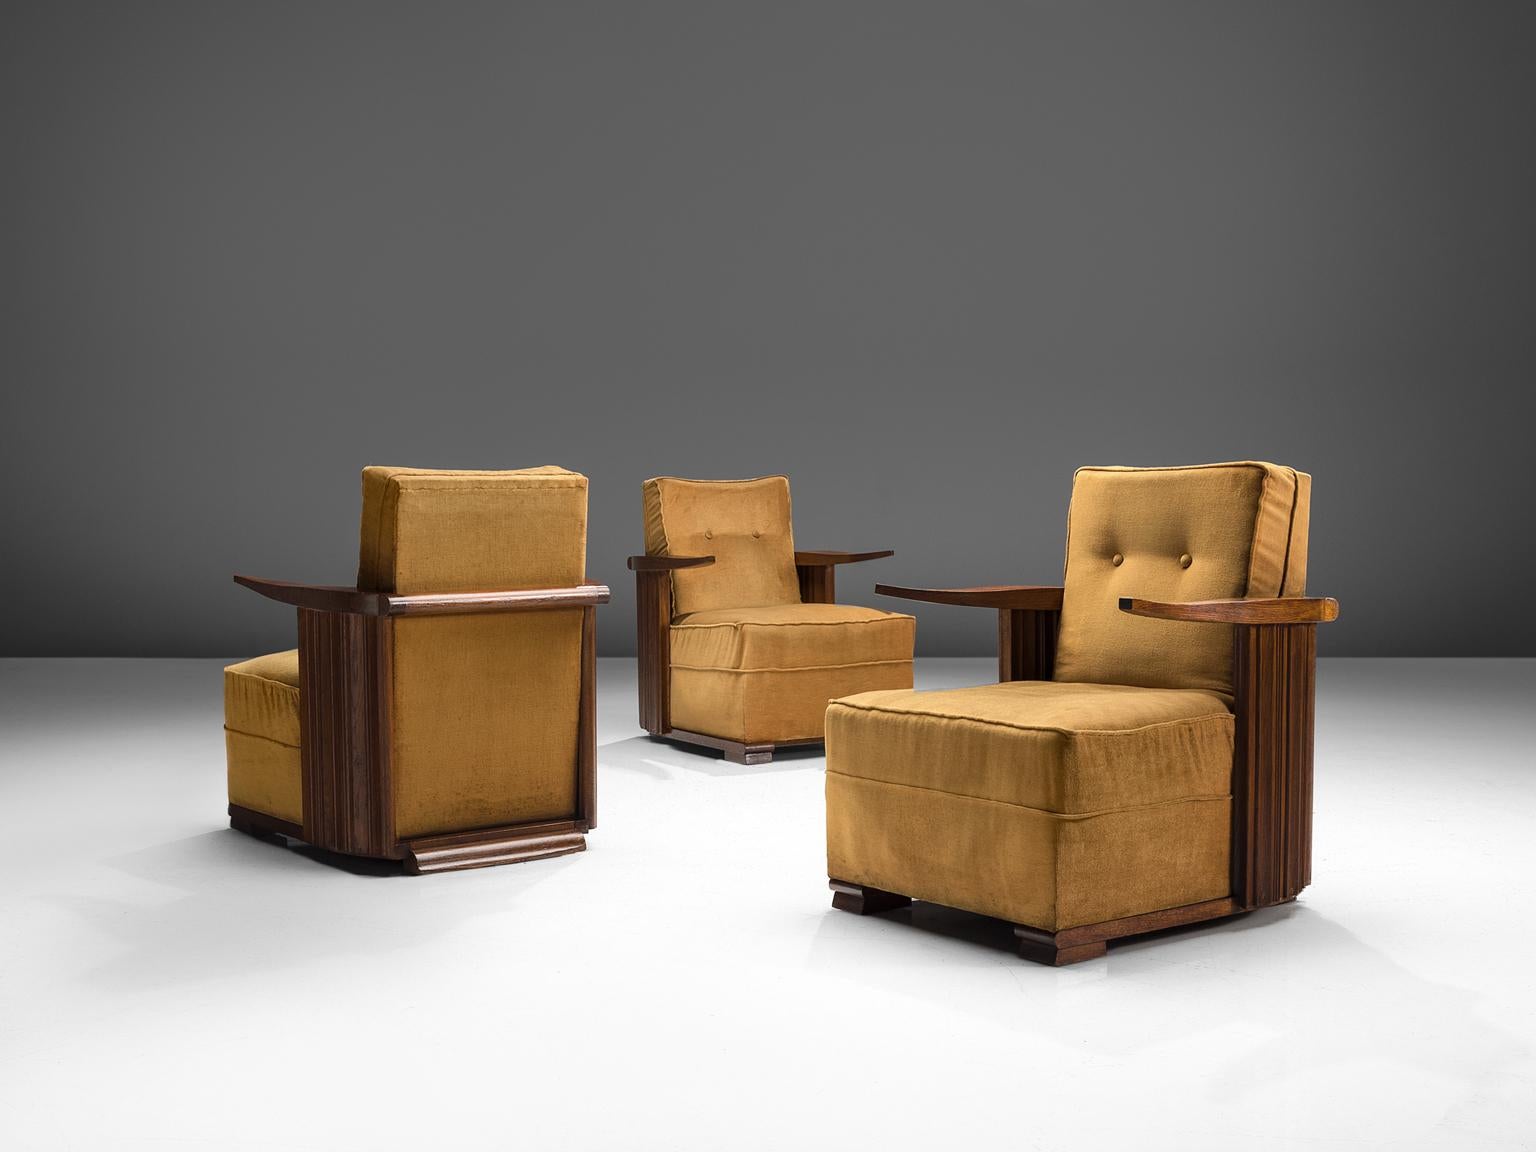 Lounge chairs, oak and ocre velvet, France, 1930s

This unique design features cow horn-shaped armrests, thick cushions and carved, closed, striped sides. The legs consists of two horizontal, flat oak carved pieces of oak. Providing this set with